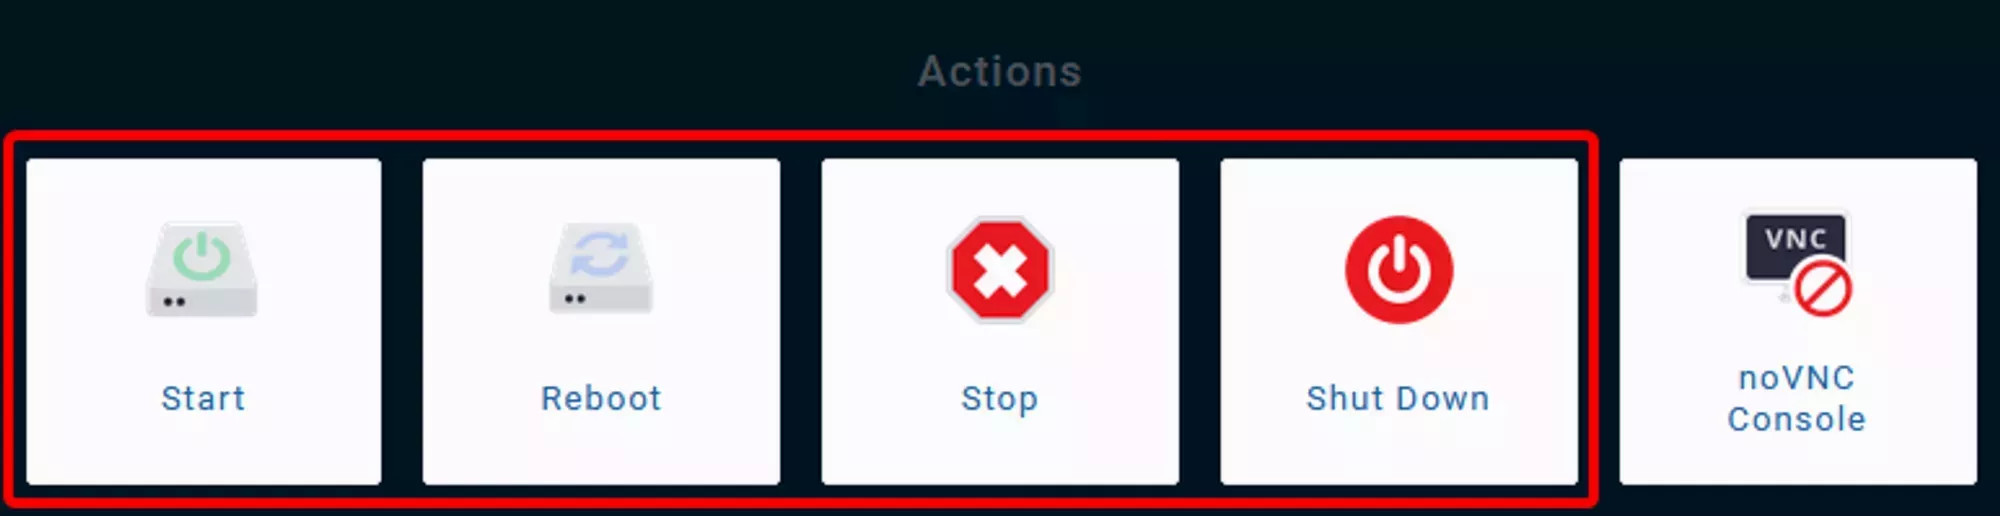 The 4 power control buttons for a VPS under the actions section in the VPS Panel